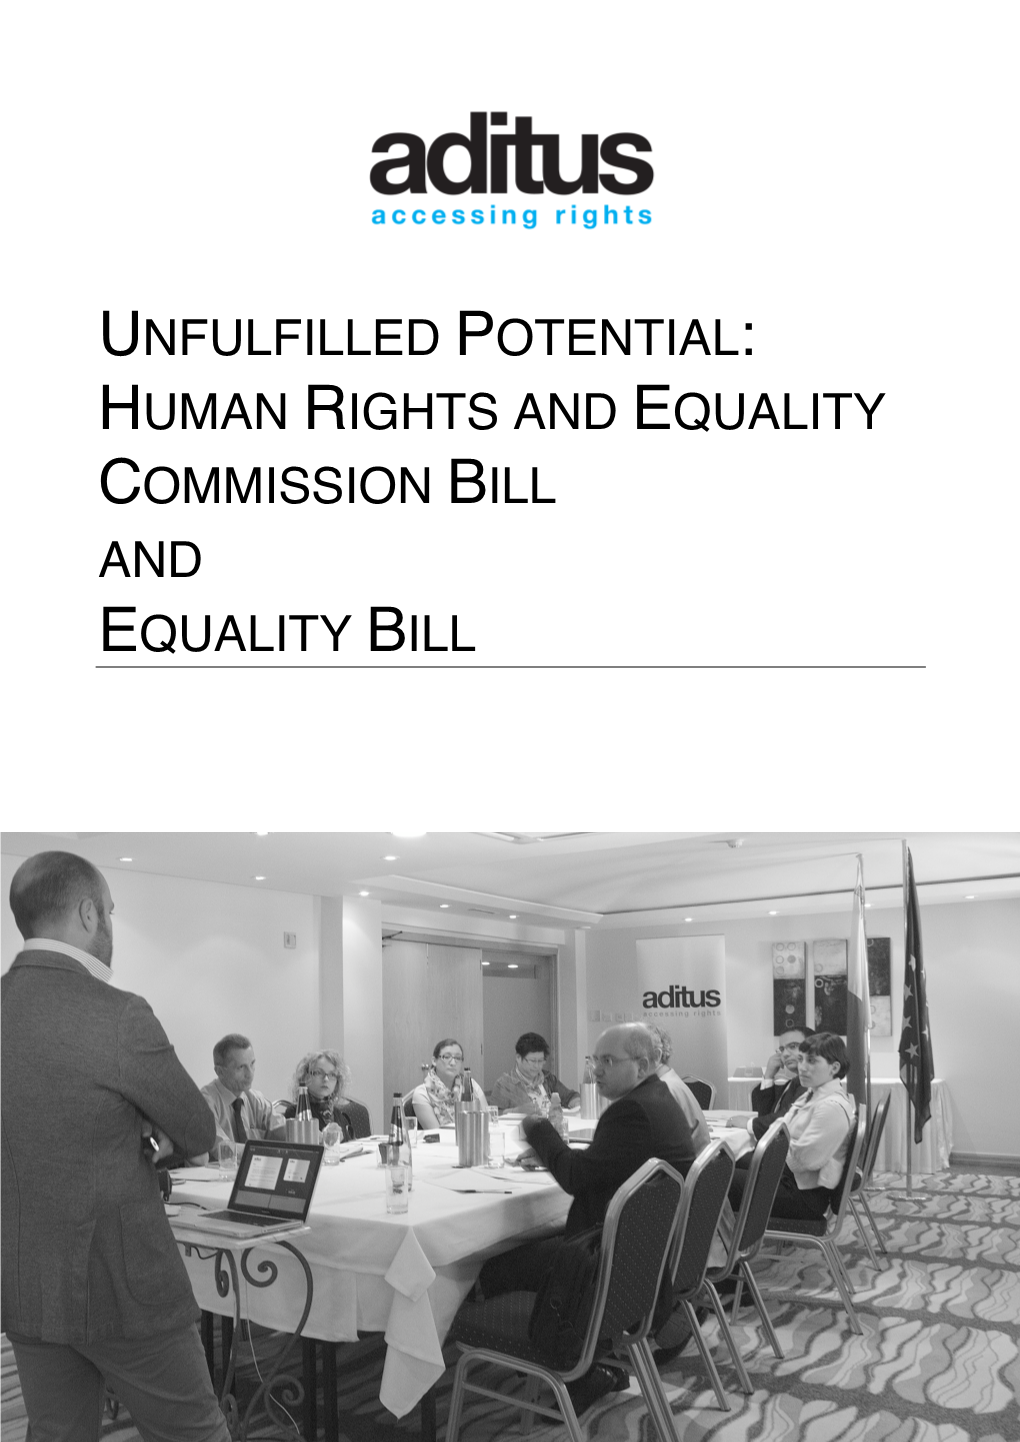 Human Rights and Equality Commission Bill and Equality Bill